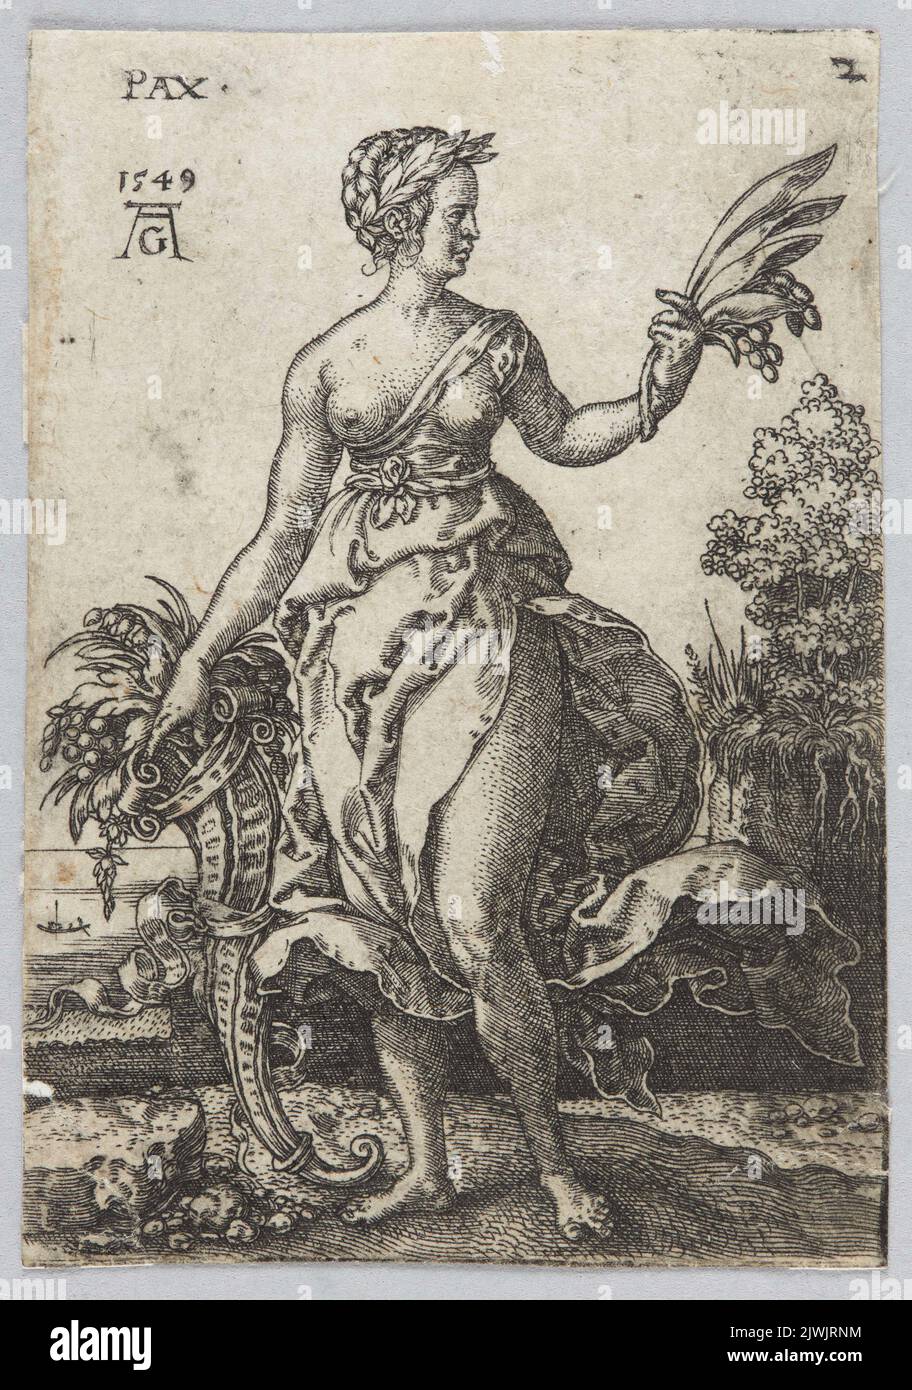 Pax, from the cycle: Allegorical figures. Aldegrever, Heinrich (1502-1555/1561), graphic artist Stock Photo